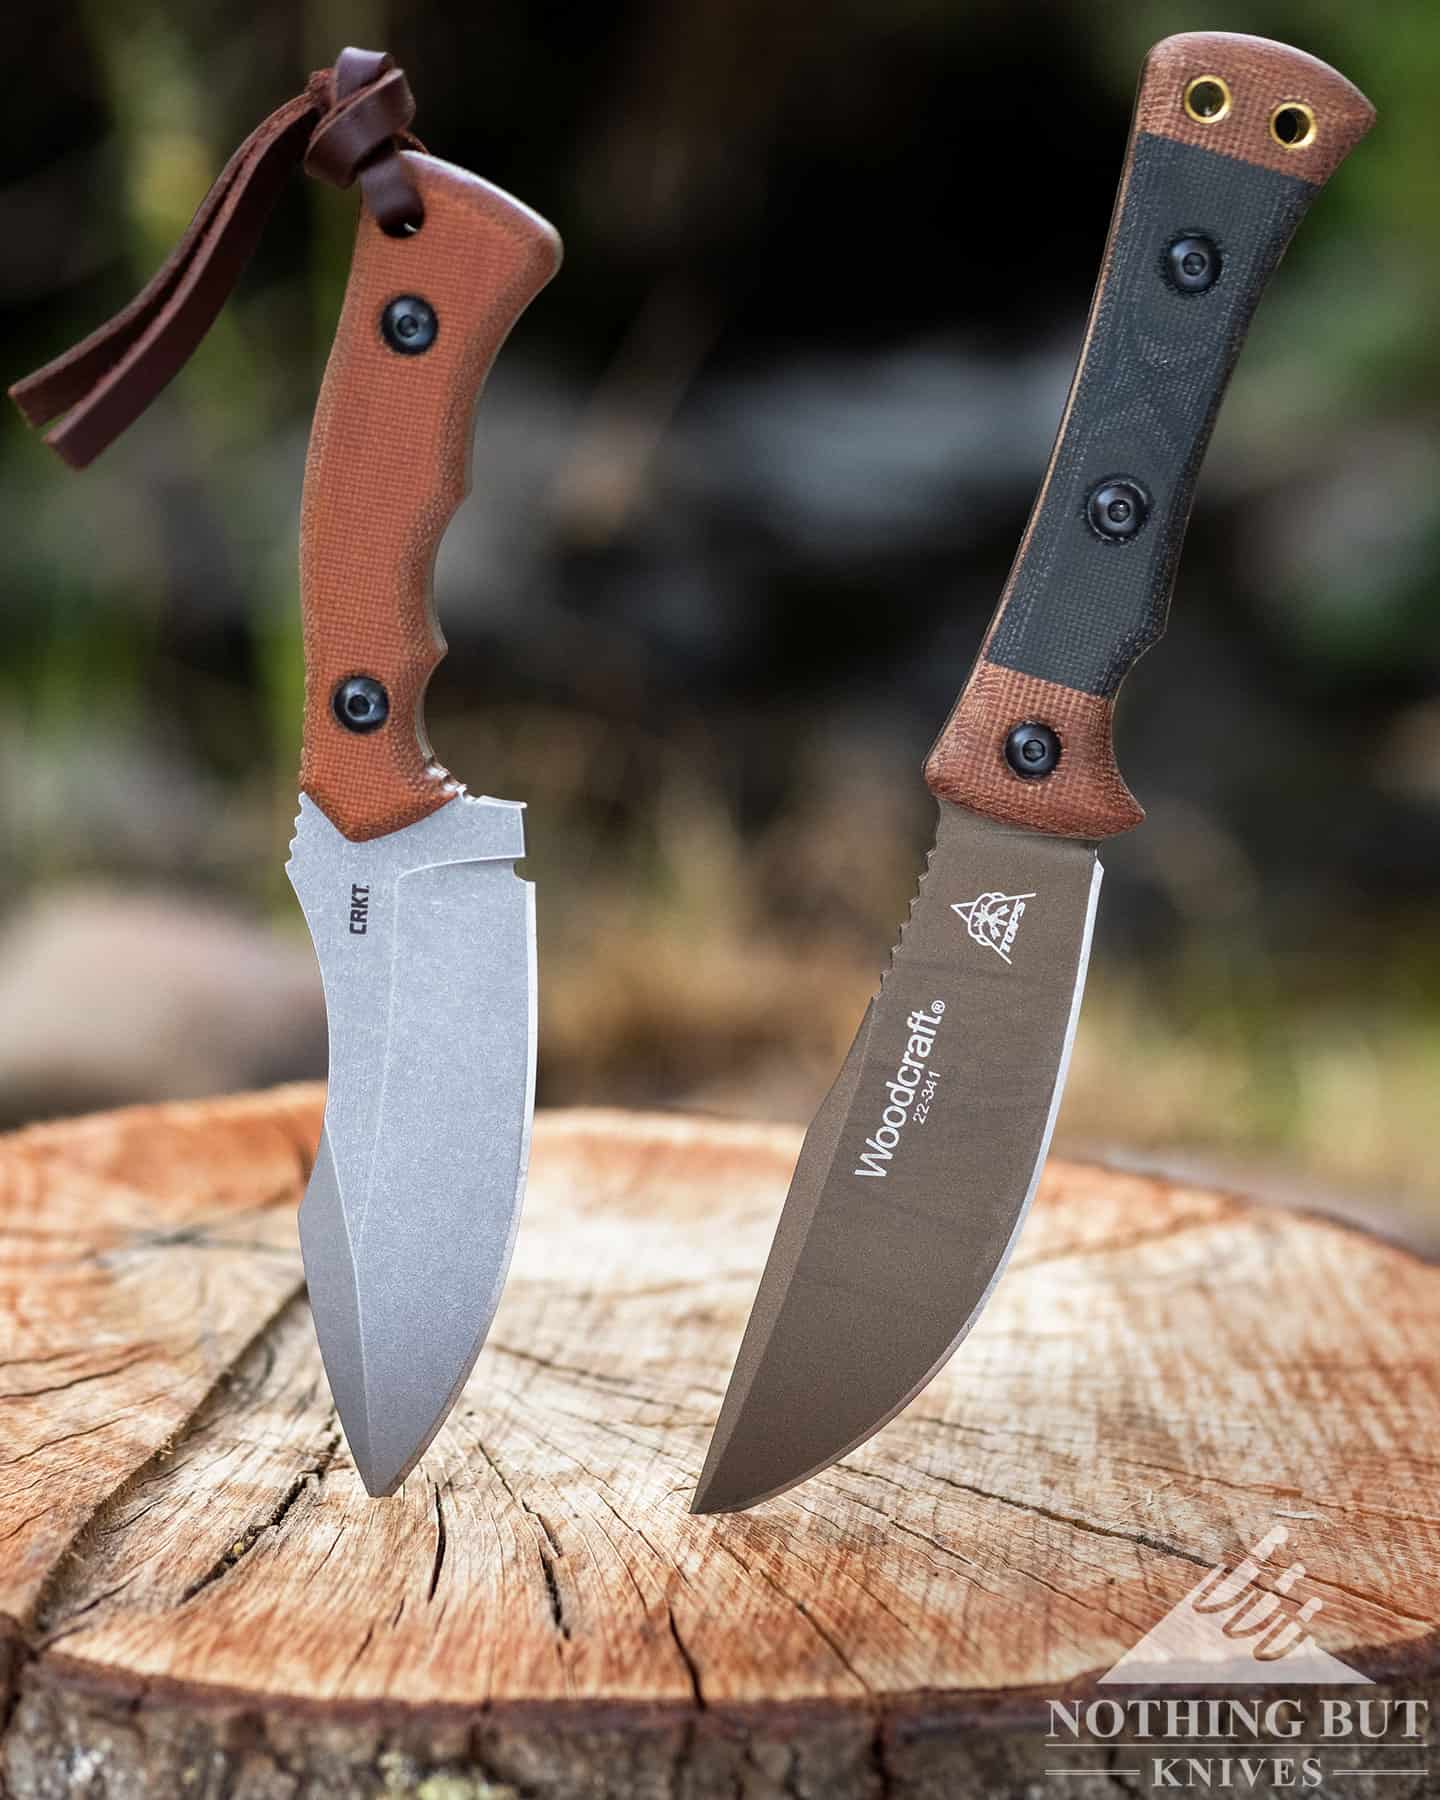 The TOPS Woodcrafter is a possible alternative to the CRKT Bugsy. 